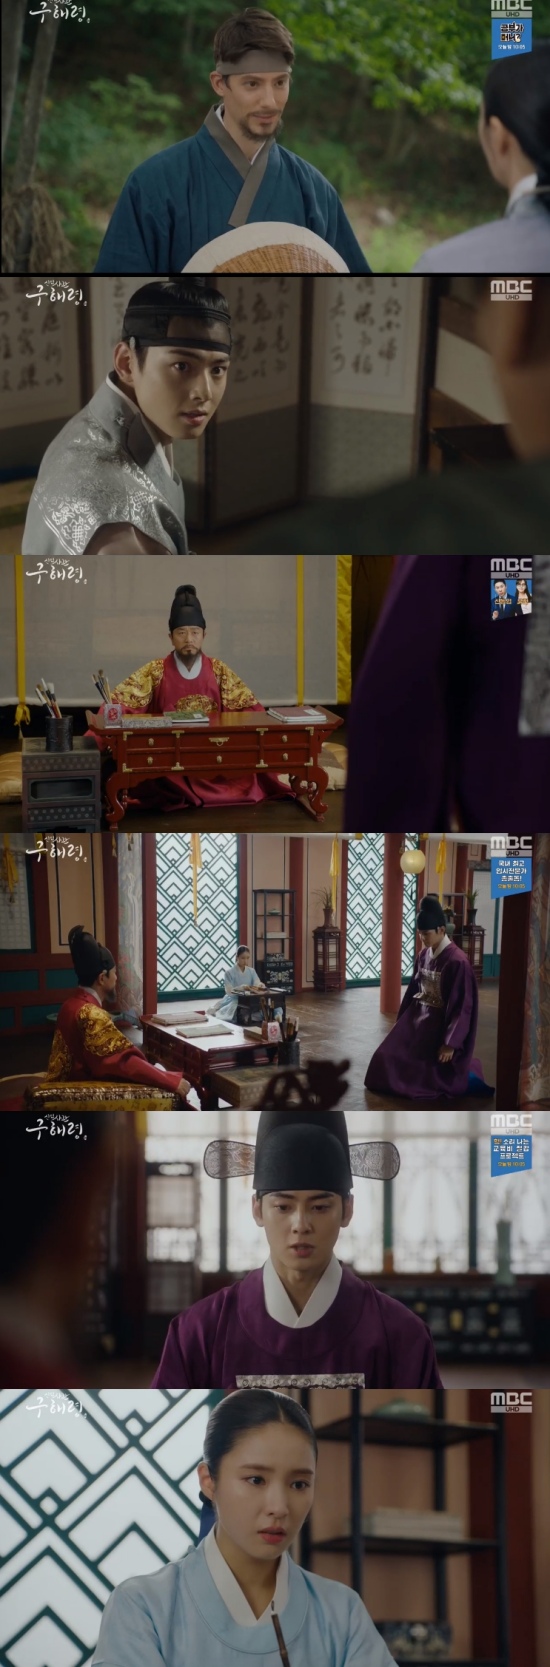 Newcomer Rookie Historian Goo Hae-ryung Cha Eun-woo and Shin Se-kyung are on the verge of separation.In the 27th and 28th episodes of MBCs New Entrance Officer Rookie Historian Goe-ryung broadcast on the 29th, Lee Rim (Cha Eun-woo) Rookie Historian Goo Hae-ryung (Shin Se-kyung) were depicted in a position to break up.On this day, Irim hid the transferor (Fabian) in the melted sugar, and Rookie Historian Goo Hae-ryung also helped escape.Before leaving, Rookie Historian Goo Hae-ryung wrote a letter to Confessions that he was not a merchant and came to Joseon to find his brother.Since then, Irim has been shocked to learn that those who have hidden it have been punished.Irim decided to reveal the truth to Itae even in the dissuade of Heo Sam-bo (Seong Ji-ru), and said, If I do nothing, seventy-three people die.I have been hiding quietly in the rusty hall for the rest of my life, and I will not live like that anymore. Rookie Historian Goo Hae-ryung followed Lee Lim, saying, Let me go with you, and eventually Lee Lim and Rookie Historian Goo Hae-ryung met Lee Tae.Lee said, I am the one I am looking for in the money department.I helped the transferee, and Rookie Historian Goo Hae-ryung recorded the conversation between Irim and Itae.Itae ordered Irim to hide the truth, and if it is revealed, he threatened to kill all those who knew the truth, including Rookie Historian Goo Hae-ryung.Lee Jin (Park Ki-woong) also rebelled against Lee Tae, and when he came to Dae-han Lim (Kim Yeo-jin), Lee Tae ordered the people to be executed.Rookie Historian Goo Hae-ryung also expressed his affection for Is everything okay? And Lee said, Please tell me I did well.I think I can just say that. Rookie Historian Goo Hae-ryung approached Irim and tapped his shoulder saying, You did well. However, Itae set up a ritual to marry Irim, and increased the tension of the drama whether Irim would marry another person in a situation where Irim liked each other with Rookie Historian Goo Hae-ryung.Photo = MBC Broadcasting Screen